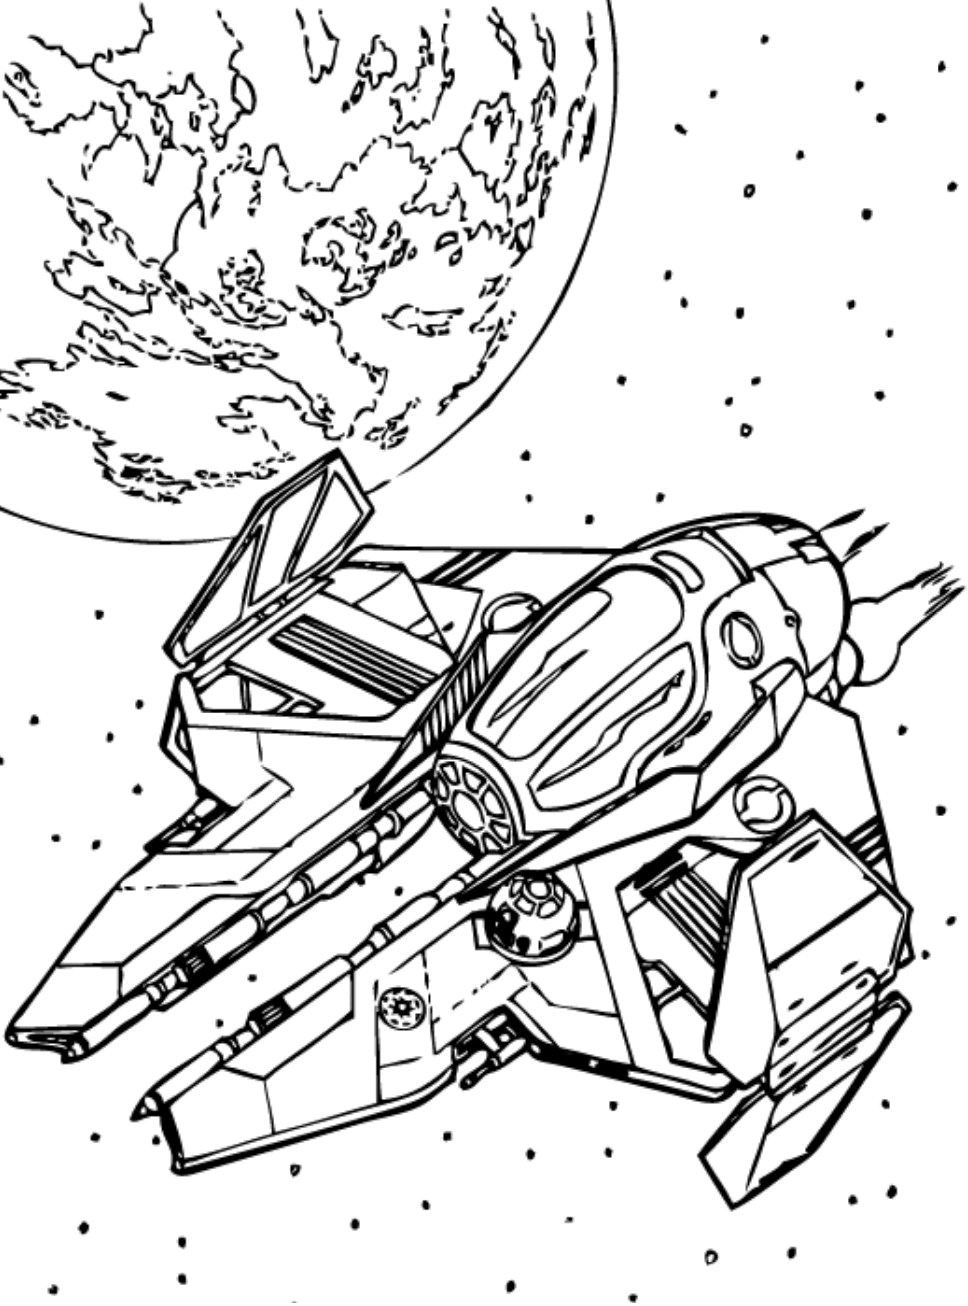 Jedi Starfighter Of Obi Wan Kenobi Coloring Page - Free Printable Coloring  Pages for Kids